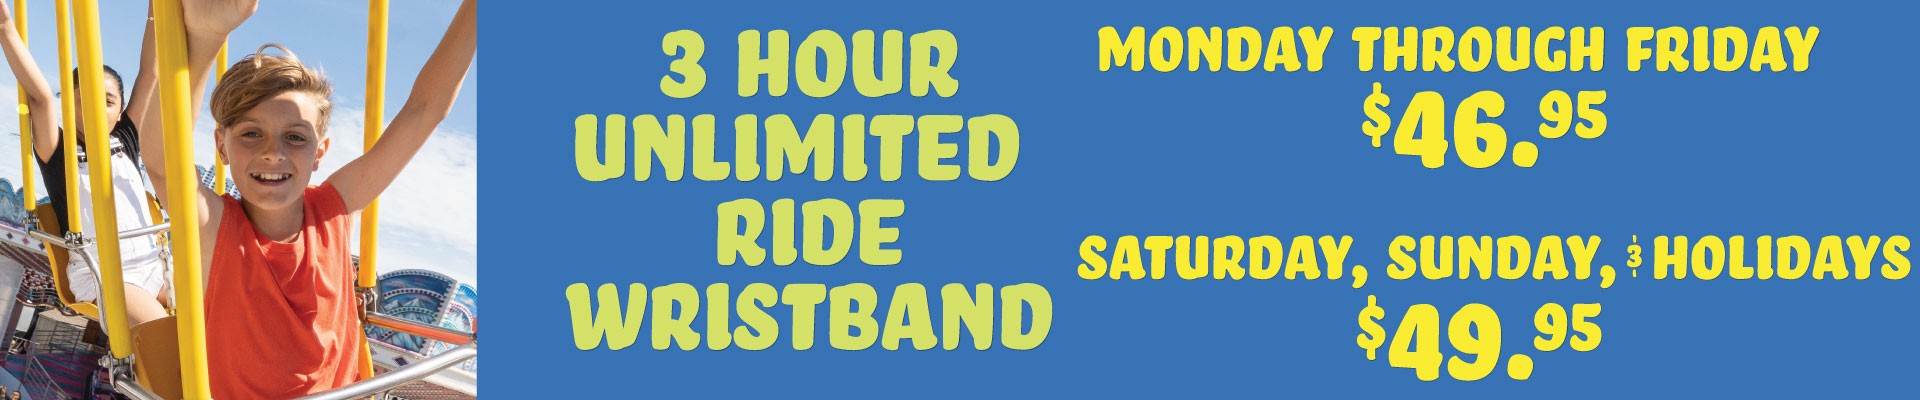 3 Hour Unlimited Ride Wristband Monday through Friday